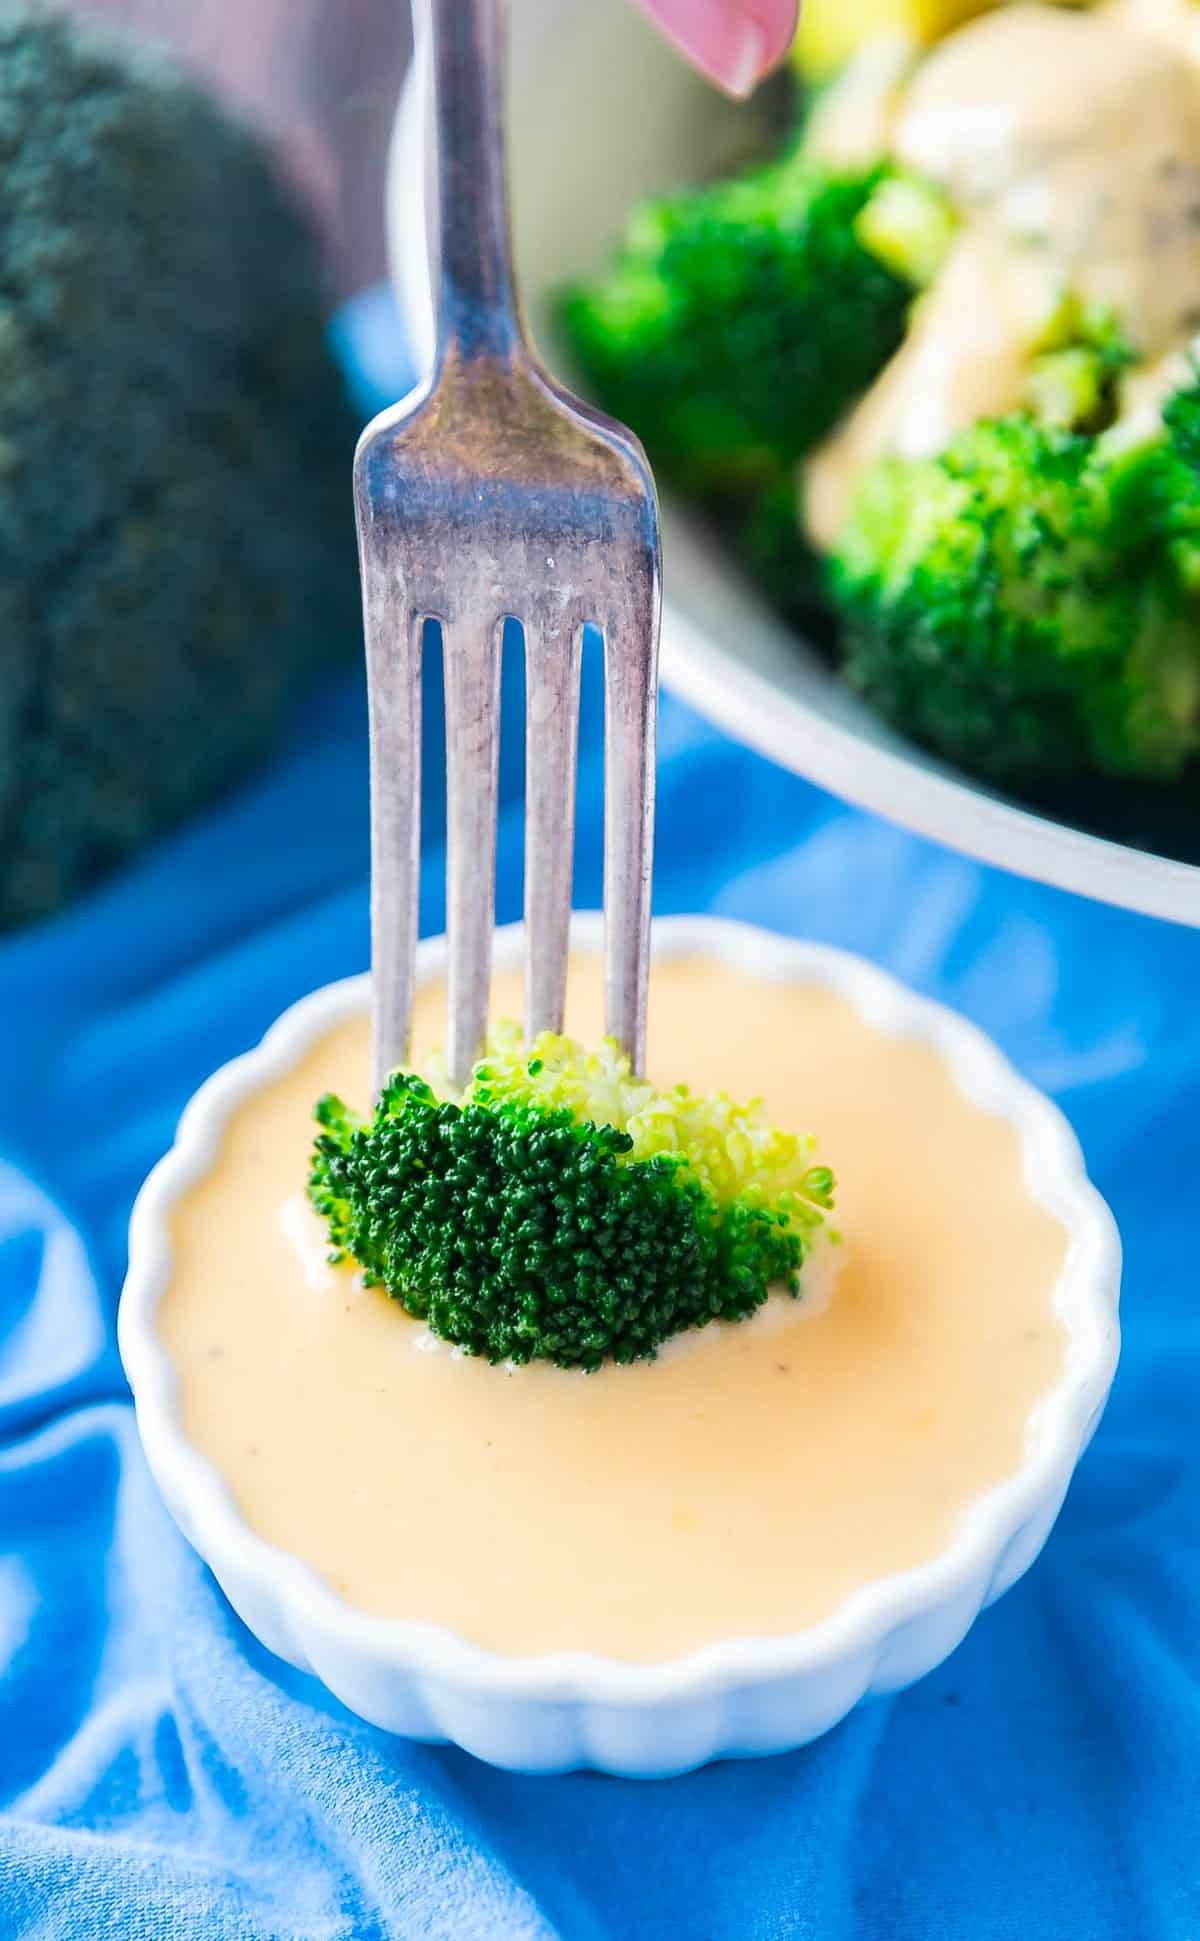 A fork dipping a piece of broccoli into a small white bowl of cheddar cheese sauce.